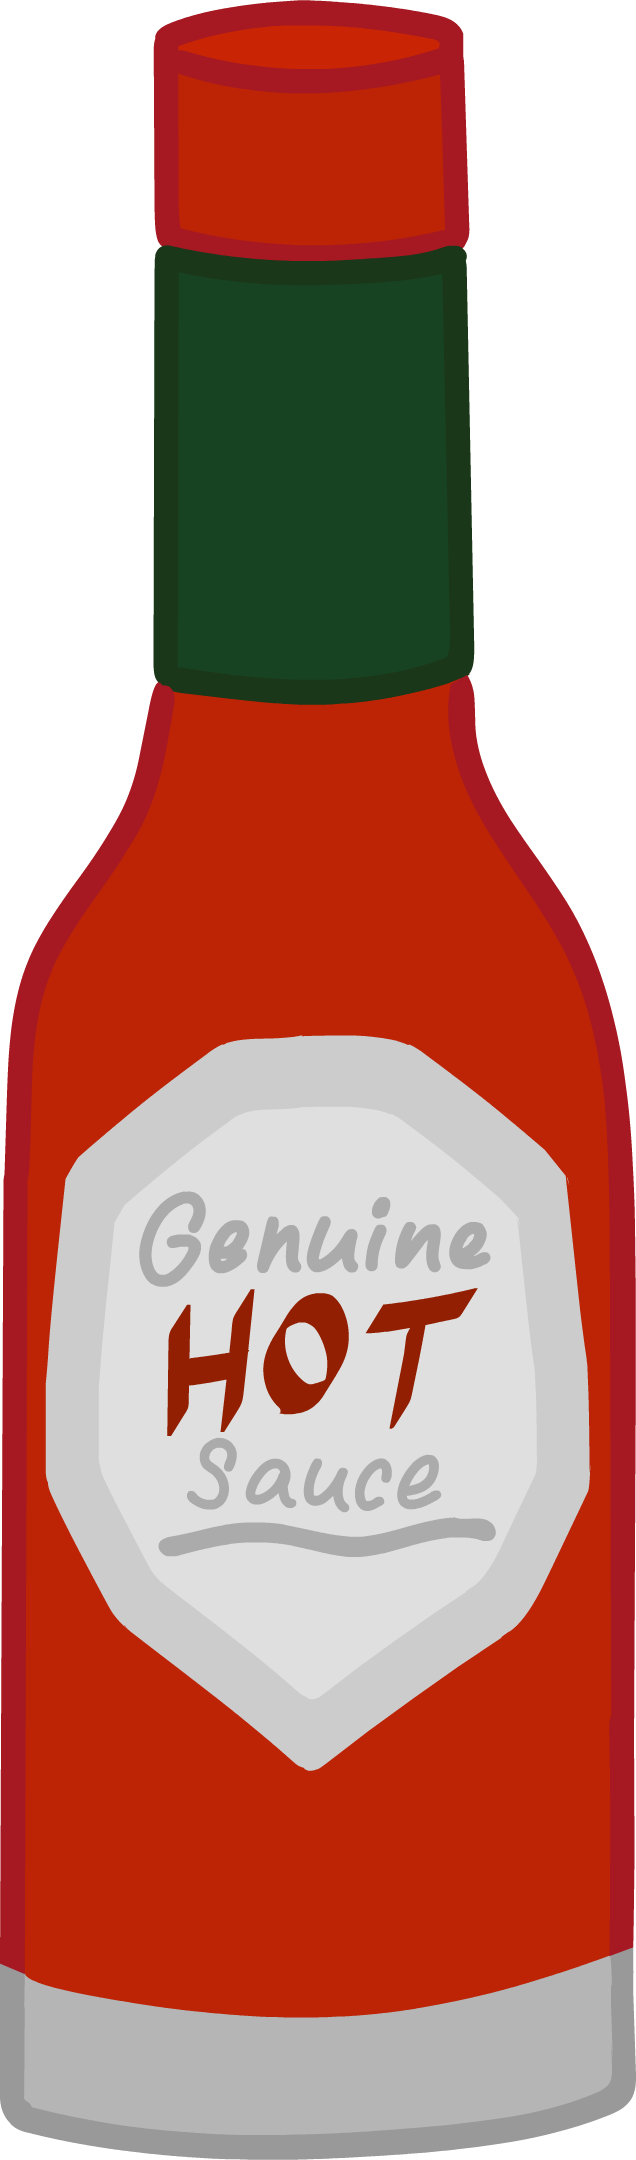 Chilli Sauce Free PNG Image